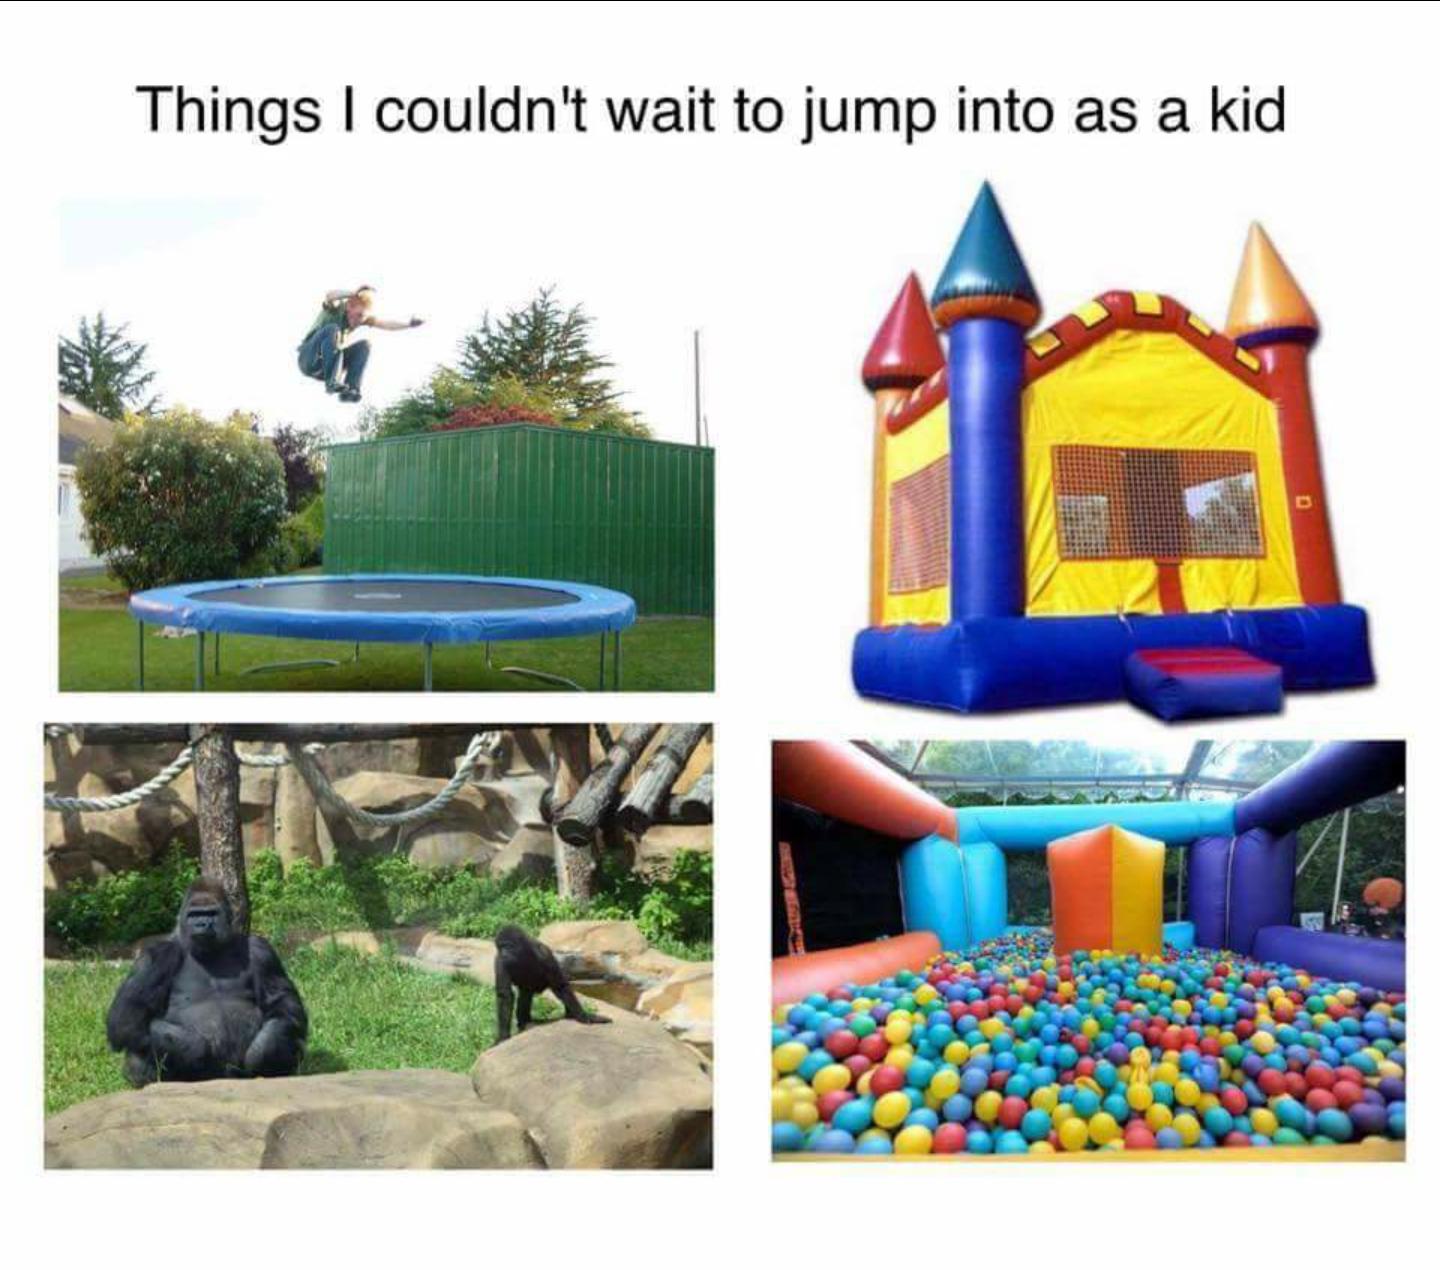 Things I couldn’t wait to jump into as a kid